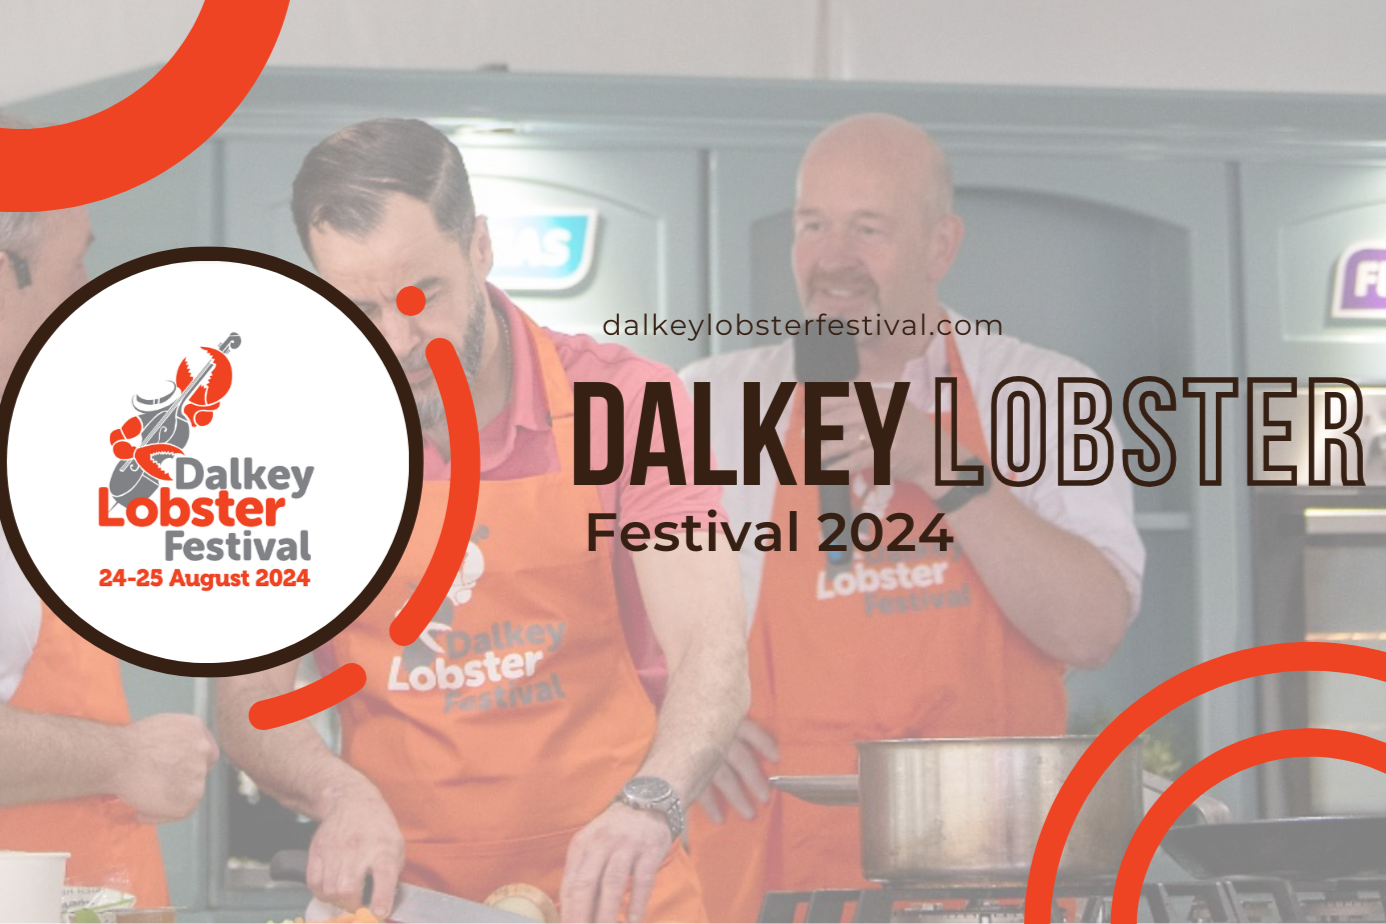 WELCOME TO THE DALKEY LOBSTER FESTIVAL